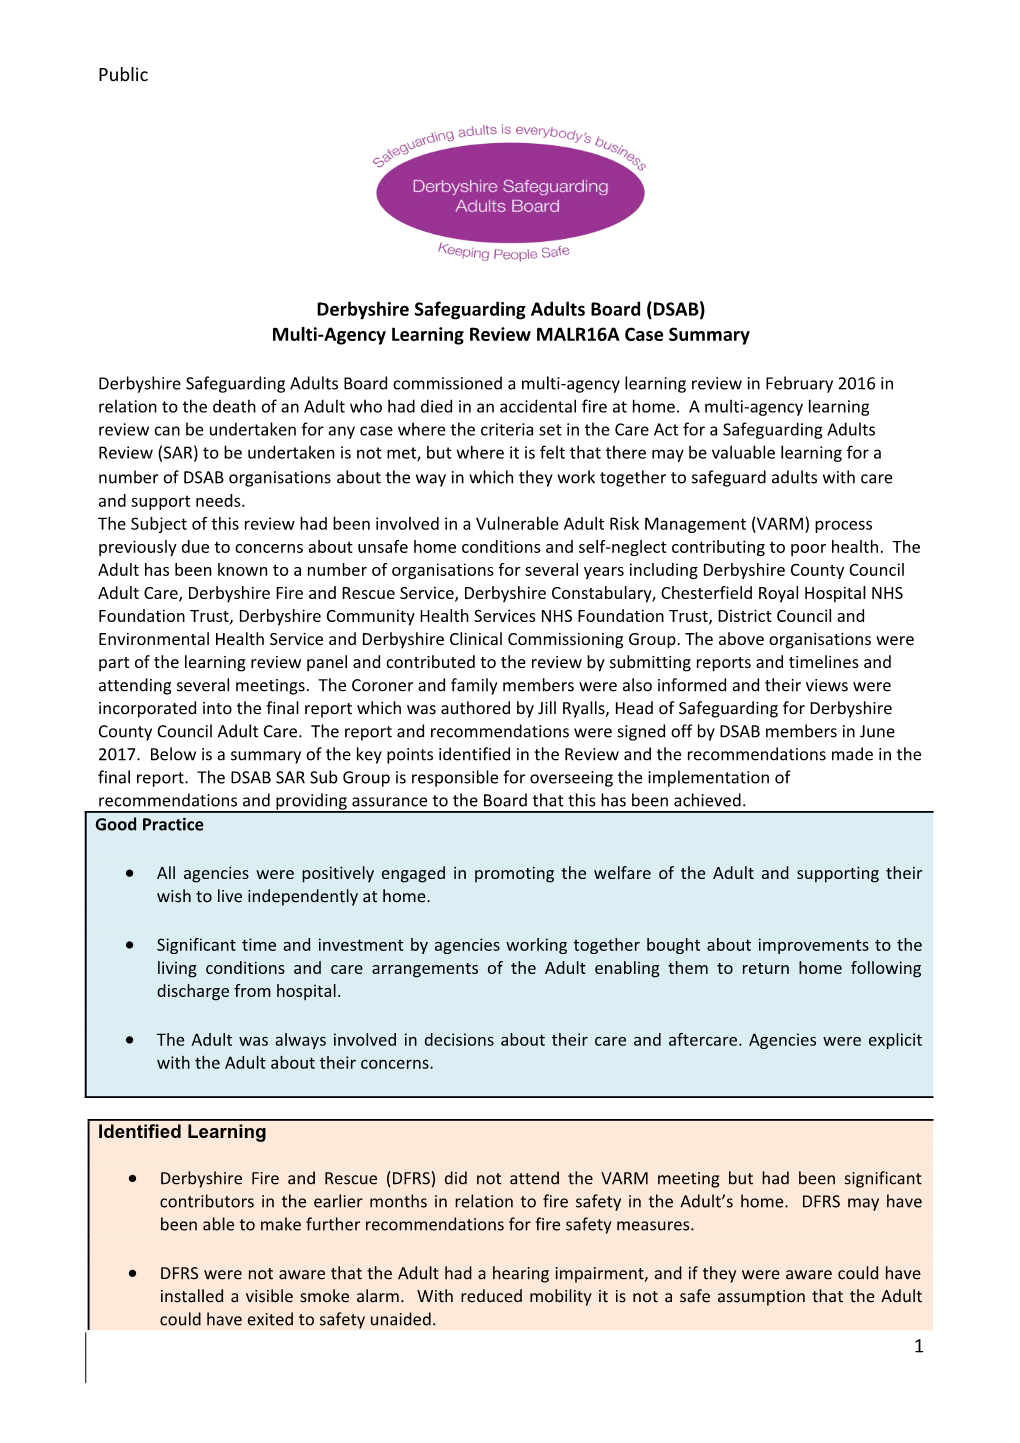 Multi Agency Learning Review MALR16A Case Summary